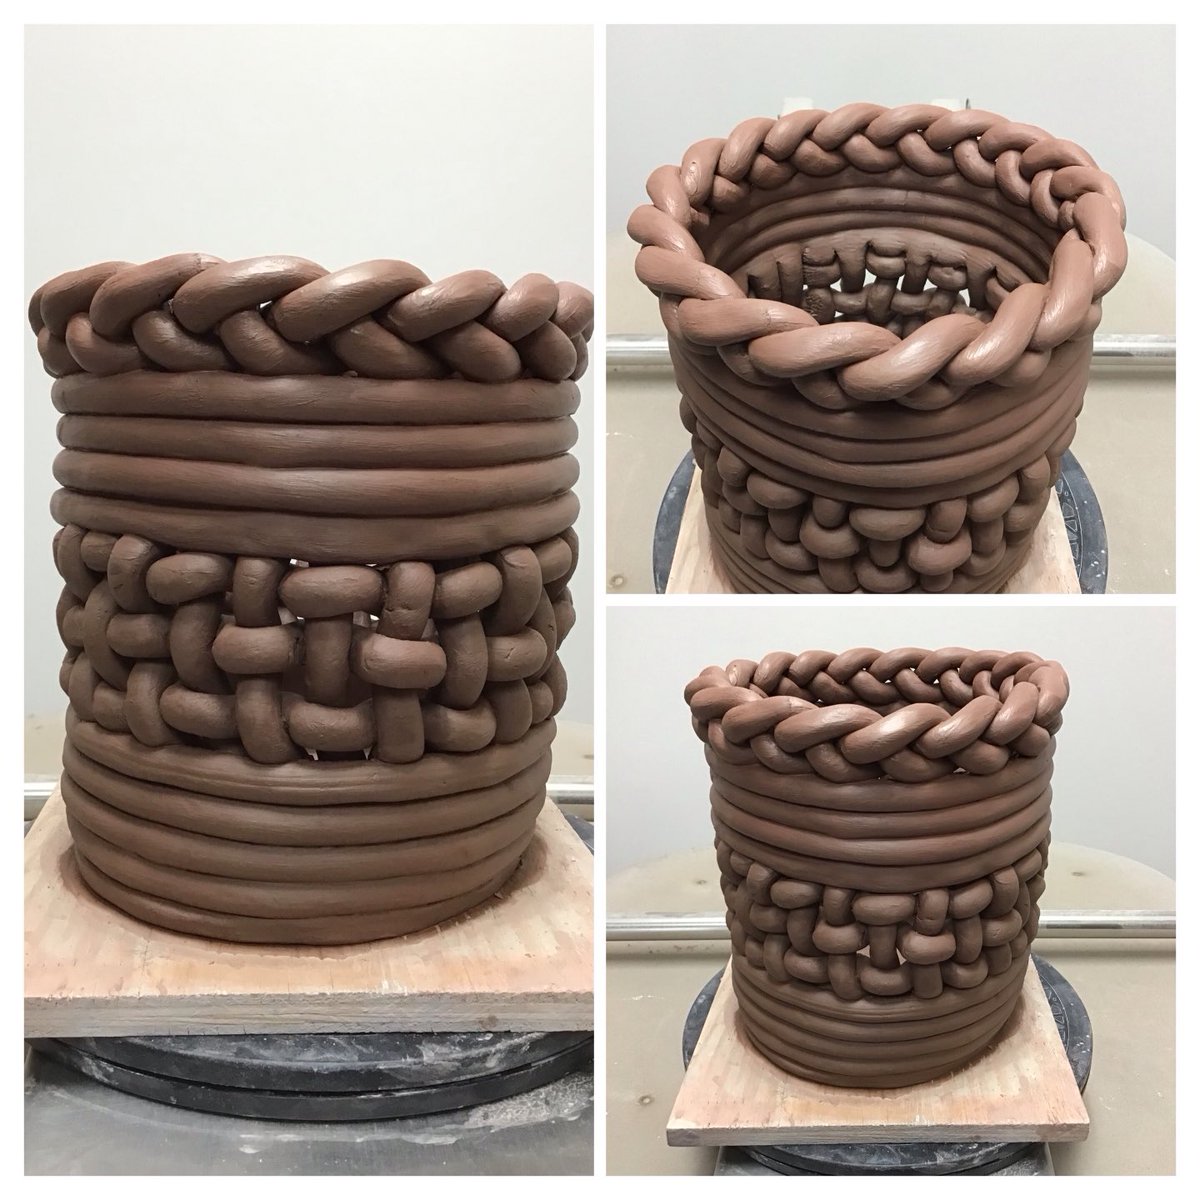 I finished my Coil Pot! ⁦@AFMSChargers⁩